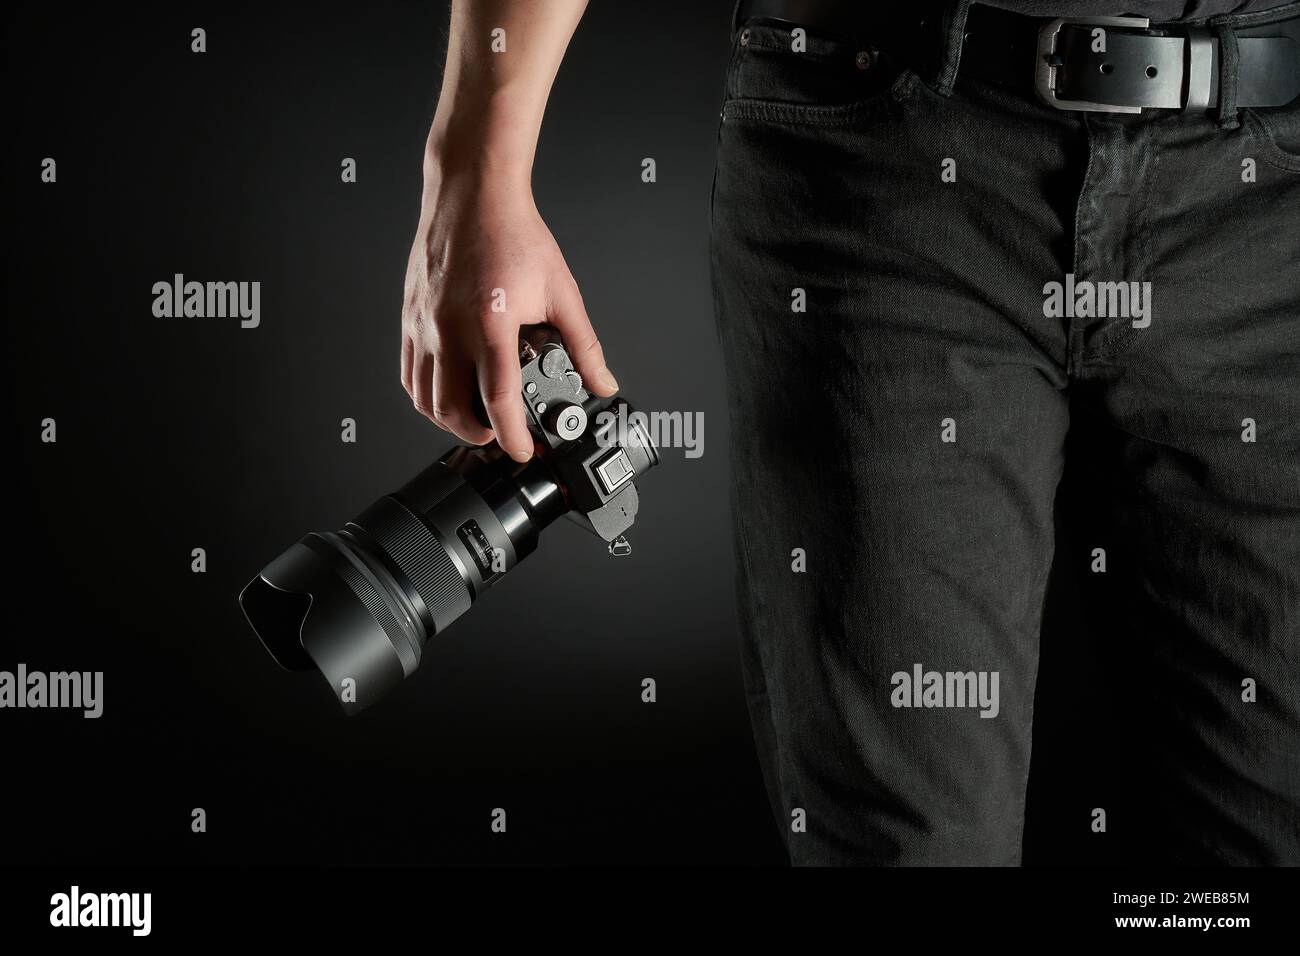 young photographer holding a mirrorless camera in his hand studio shot Stock Photo